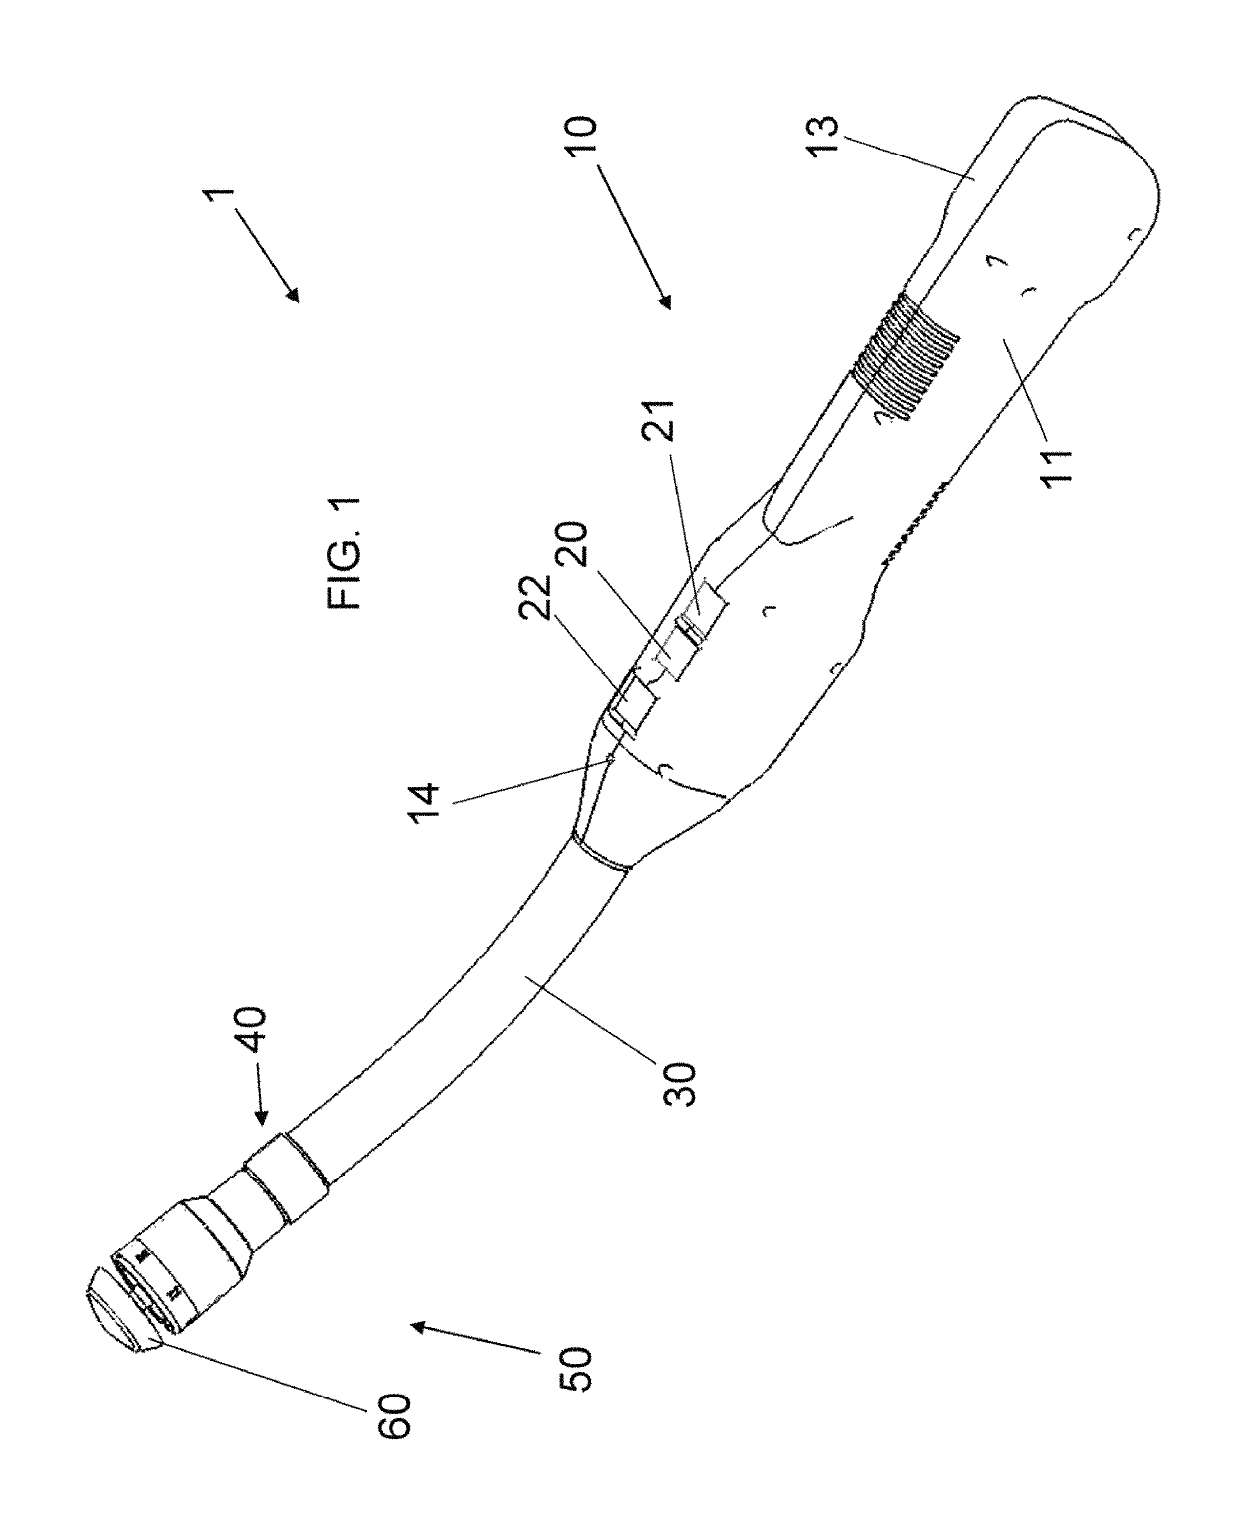 Electrically self-powered surgical instrument with manual release